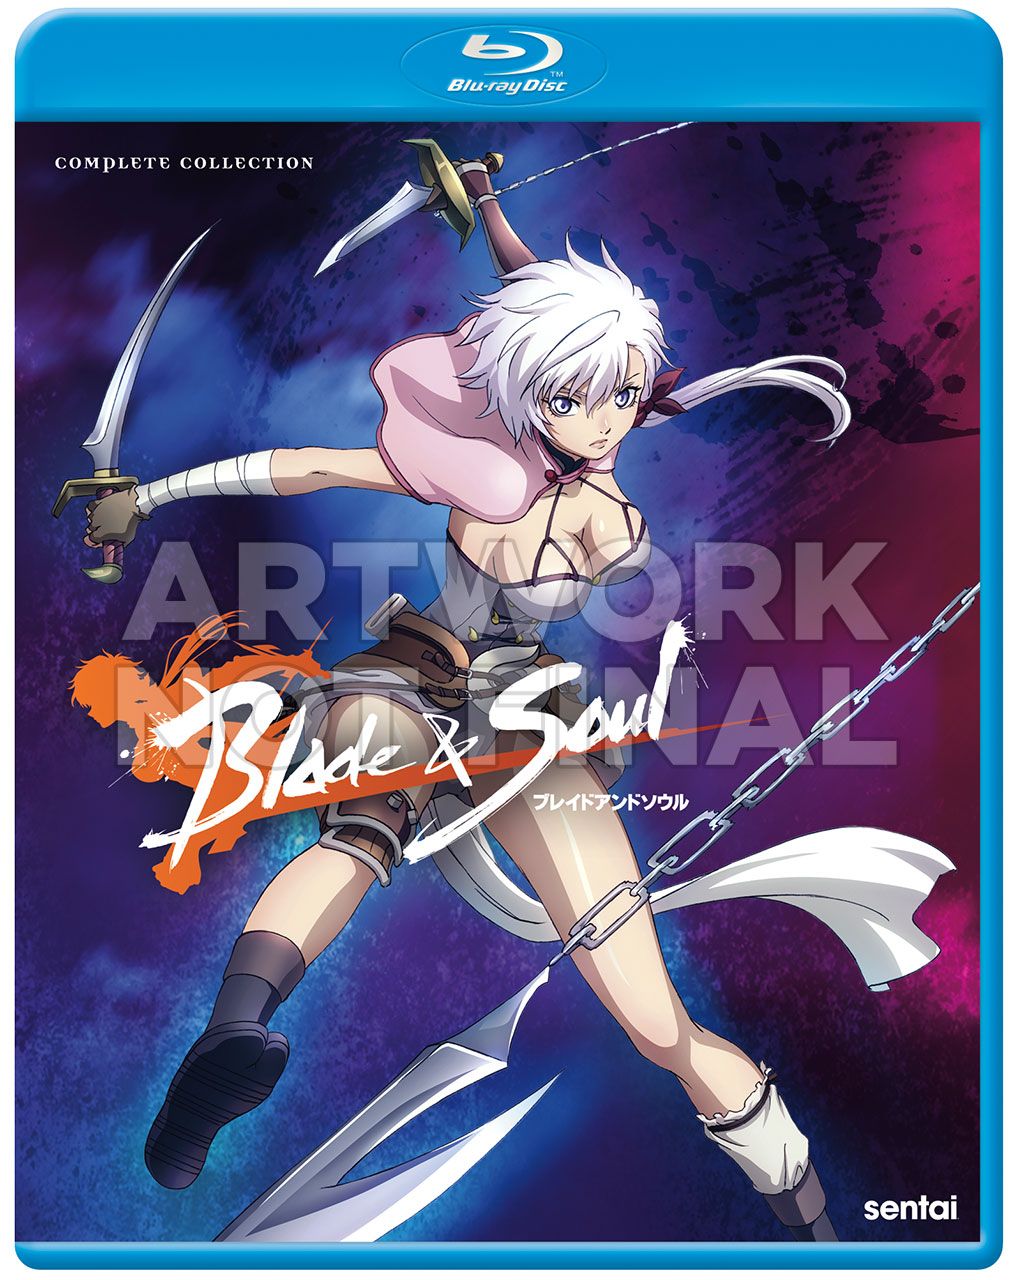 Blade & Soul. Blu-ray cover art provided by Sentai.